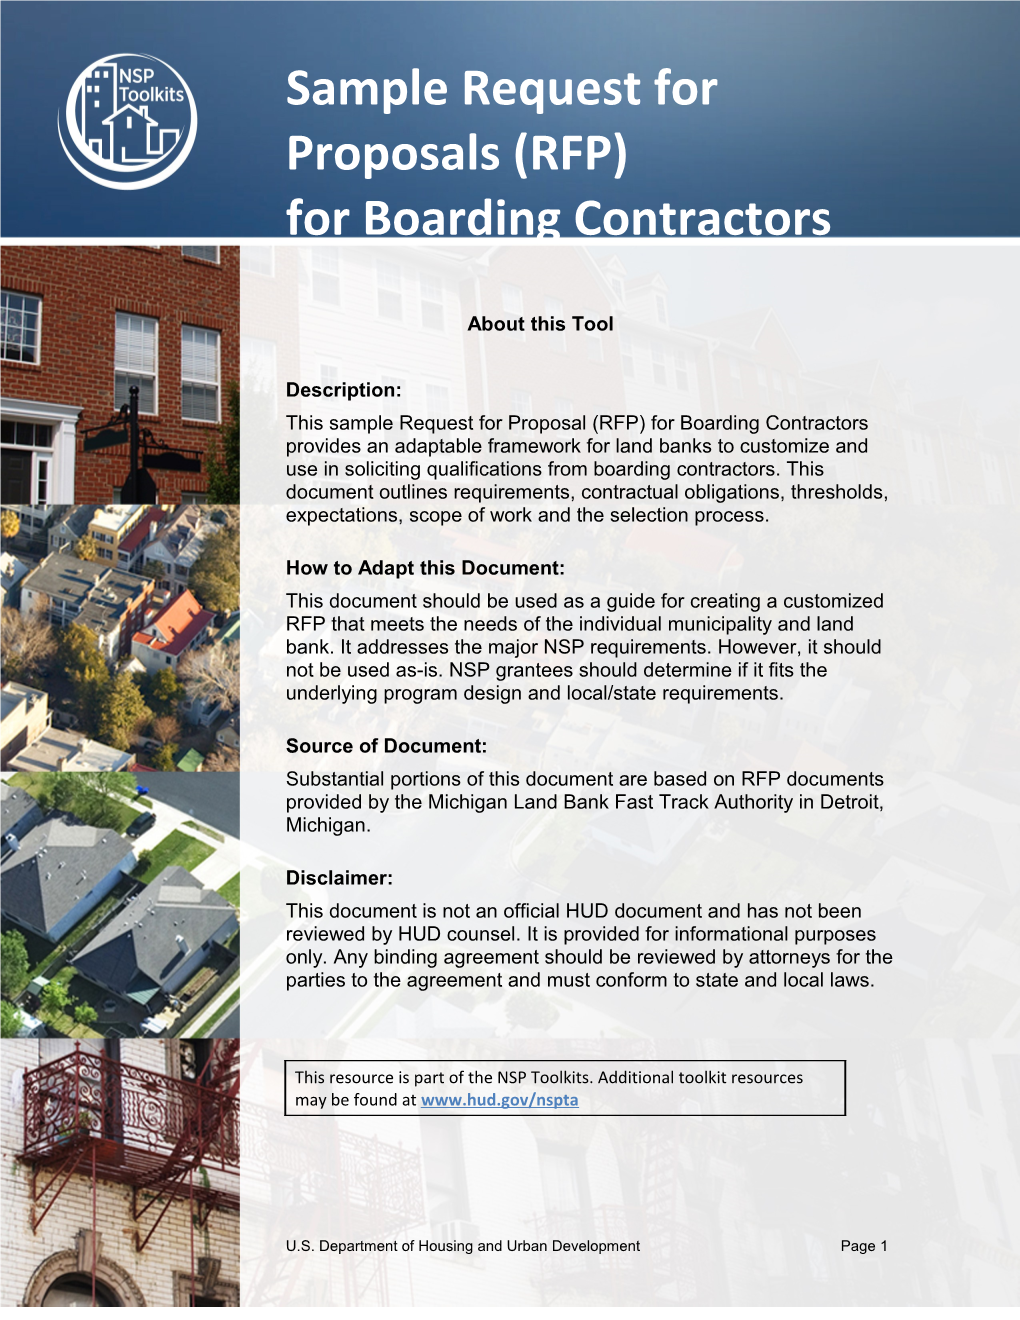 Example of a Request for Proposal Template for Boarding Contractors